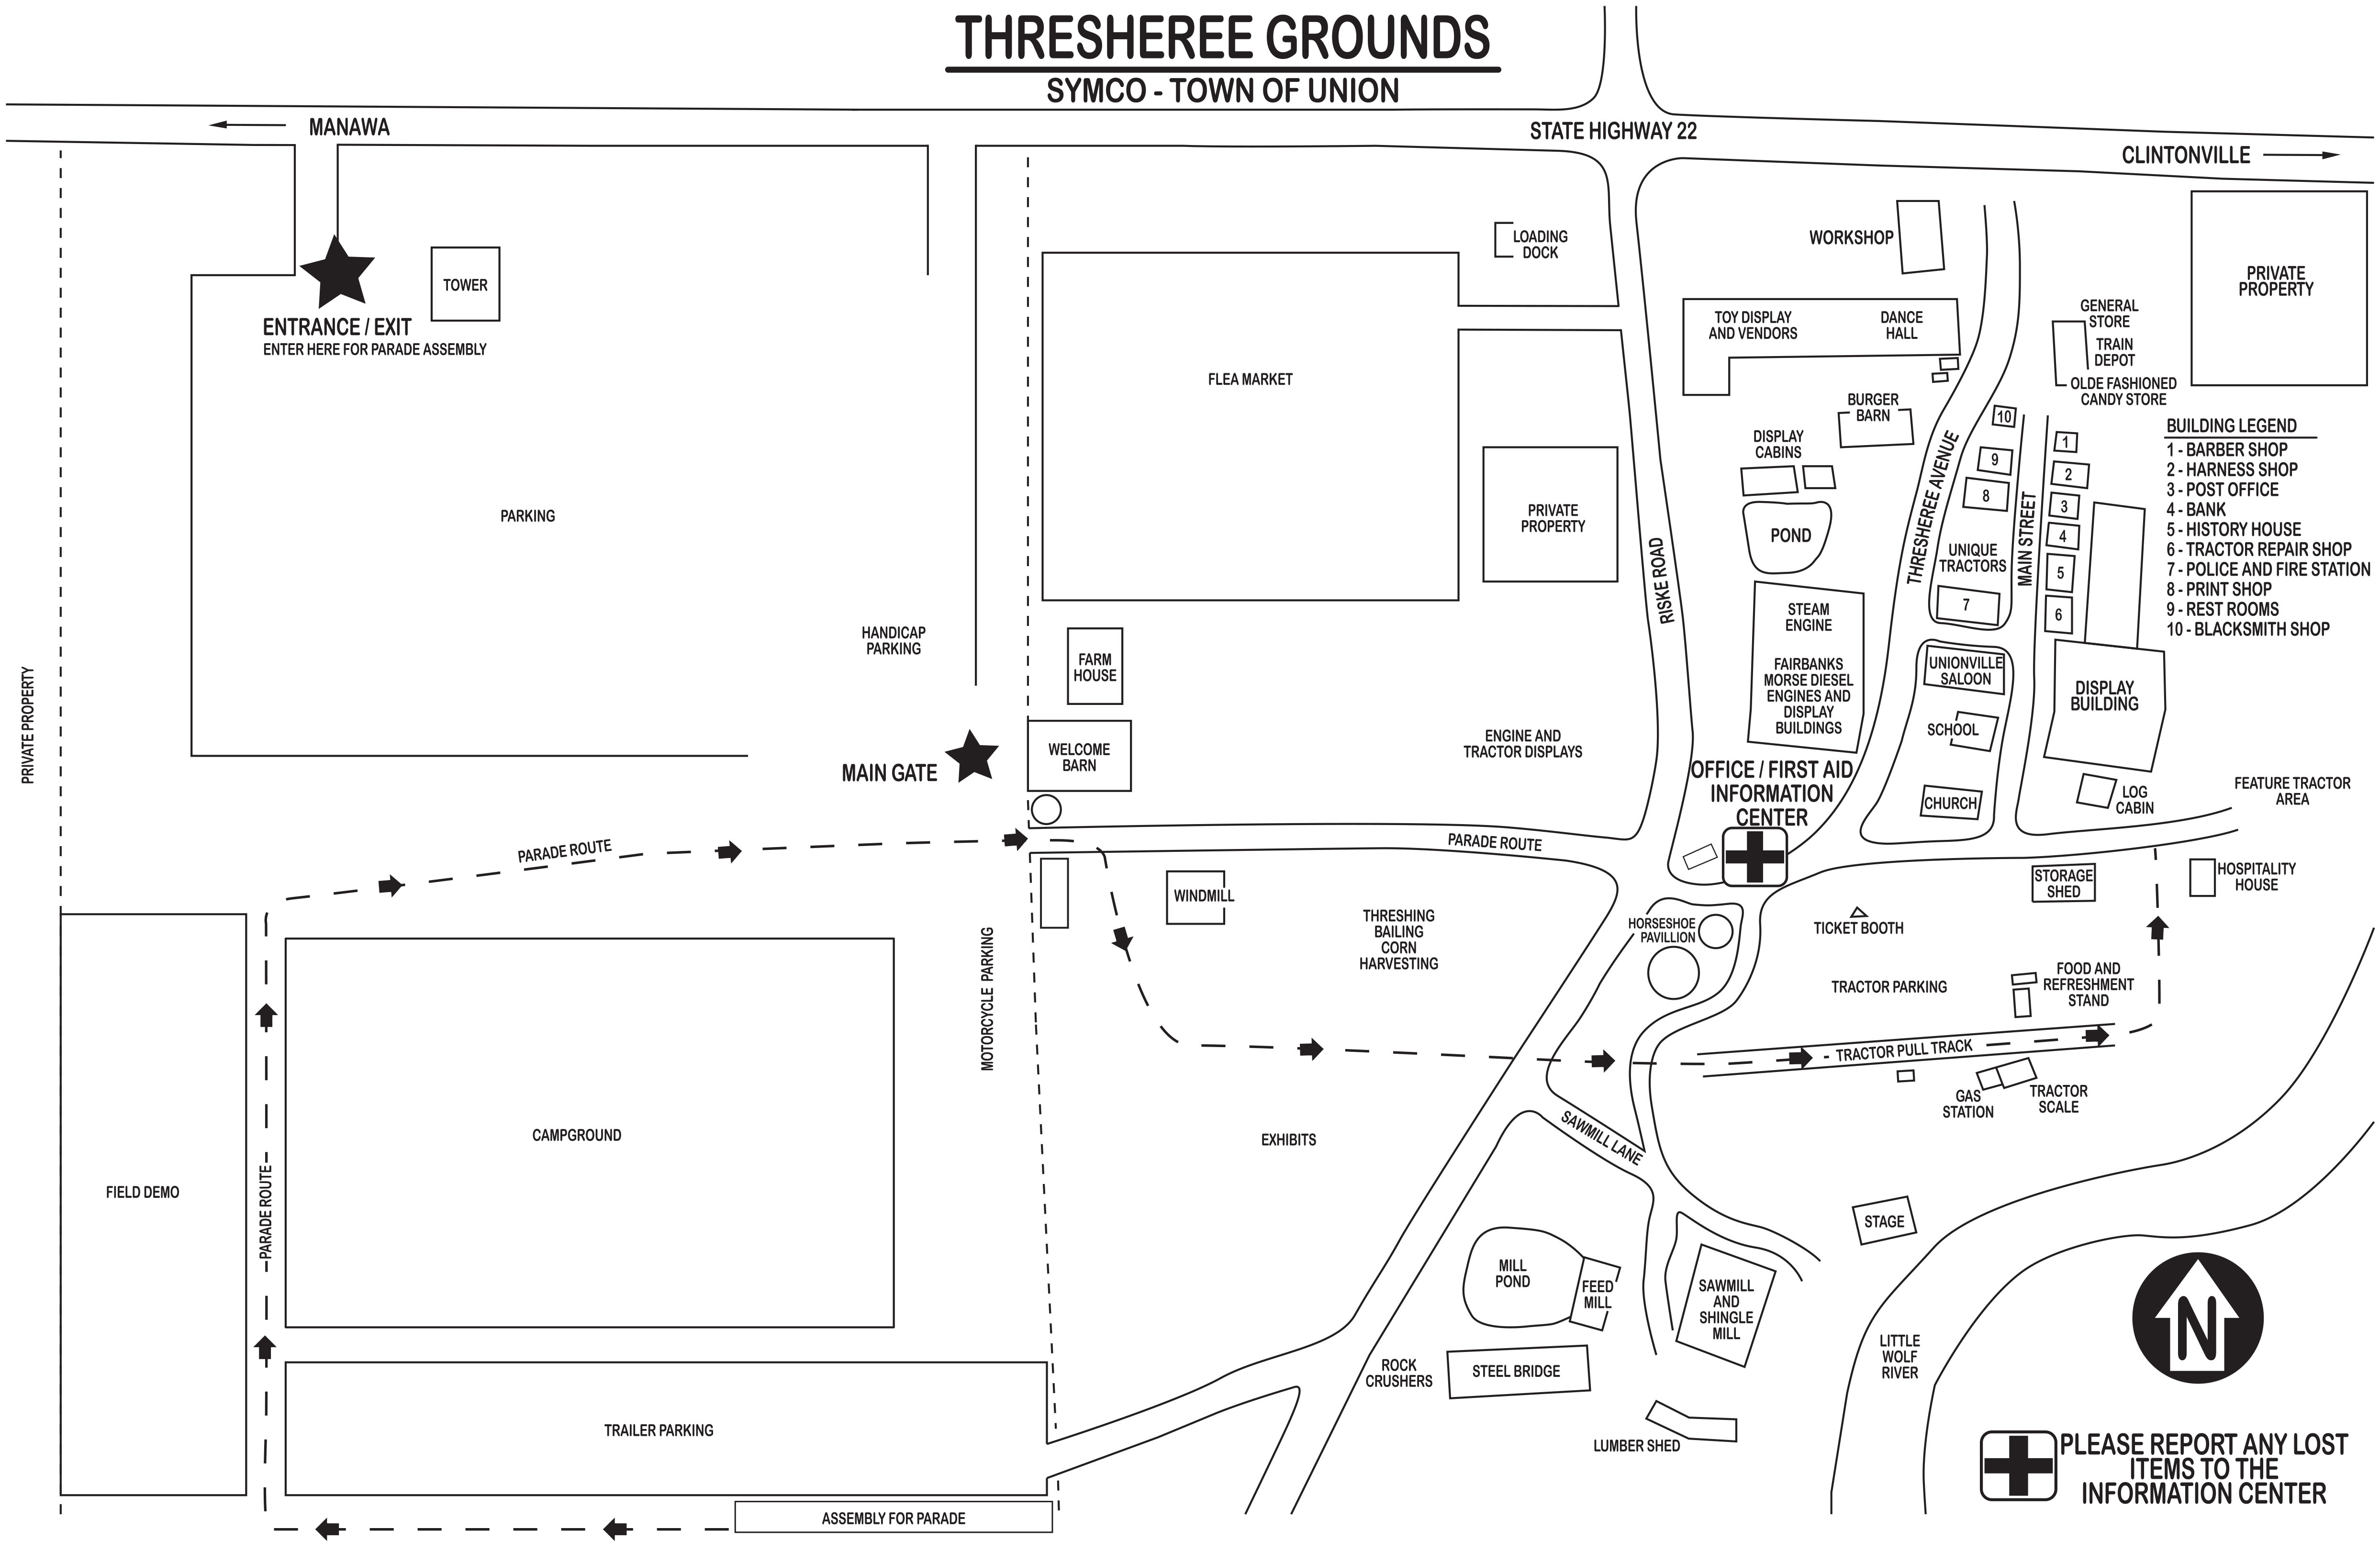 Grounds Map